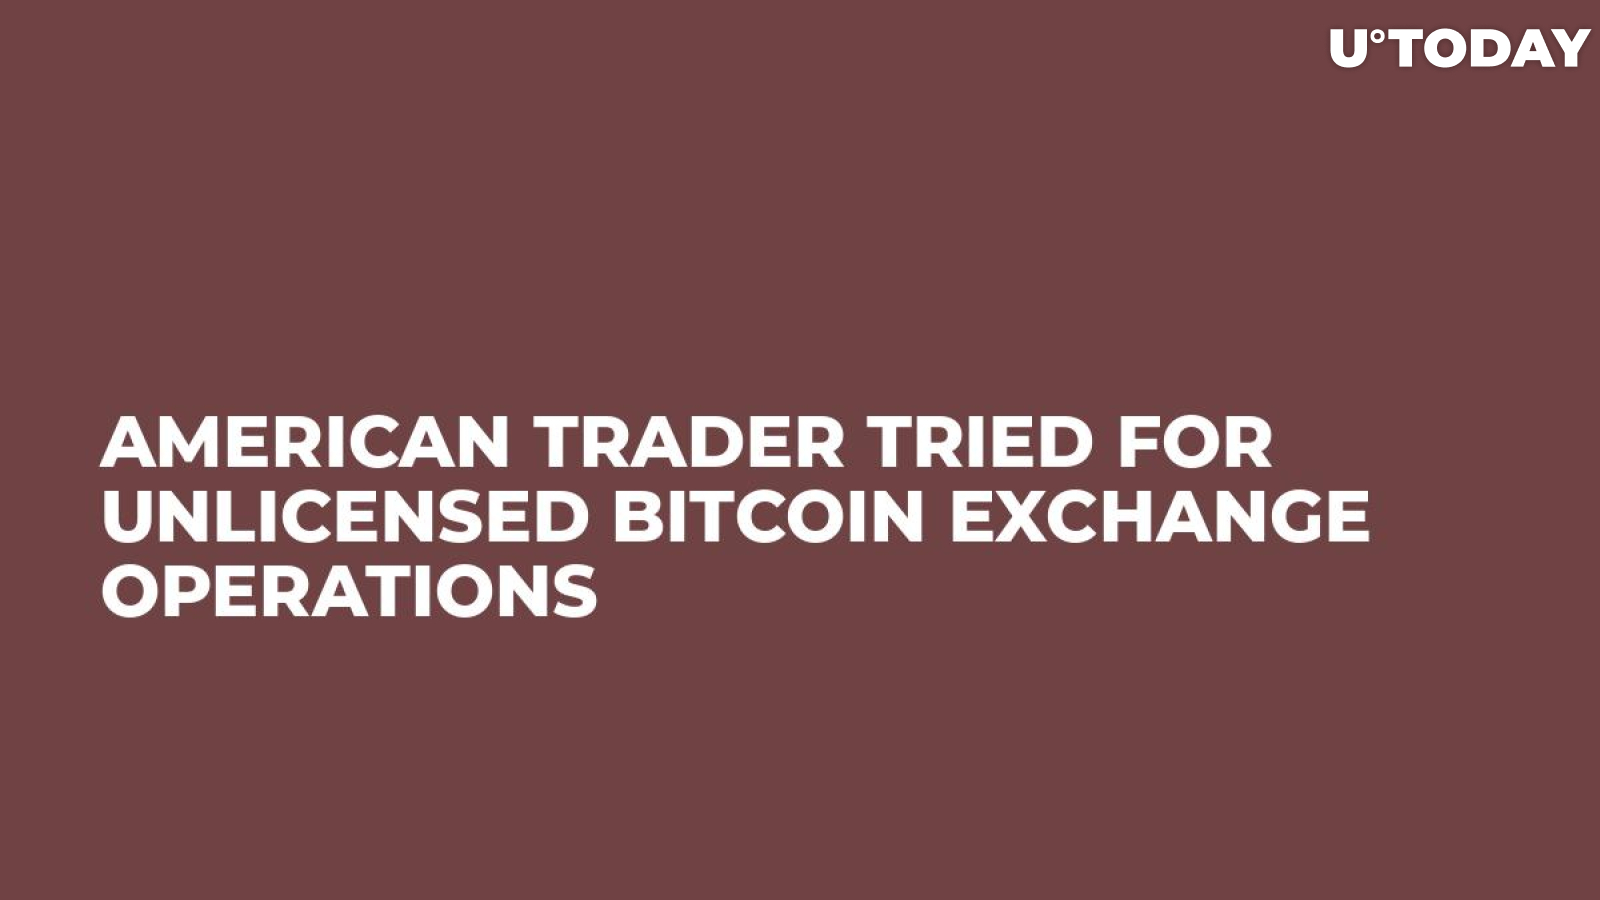 American Trader Tried For Unlicensed Bitcoin Exchange Operations